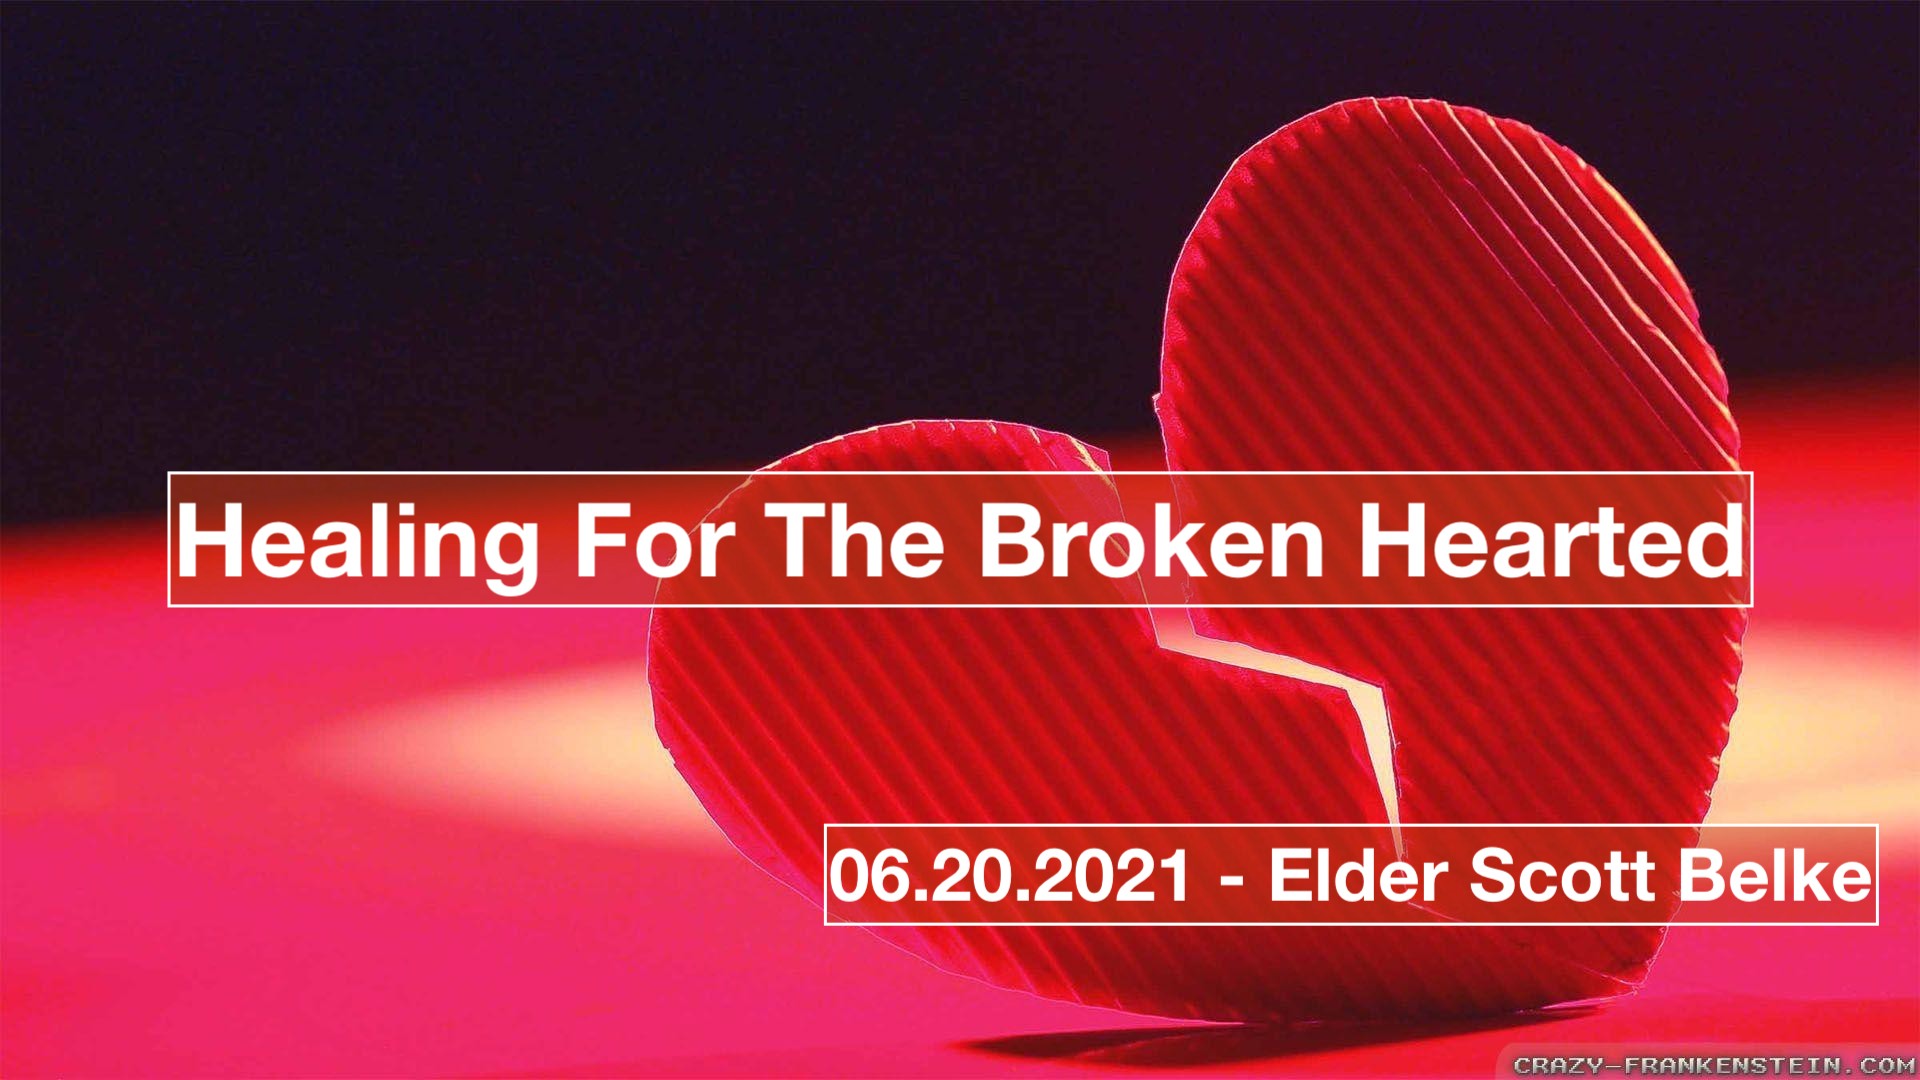 Healing For The Broken Hearted